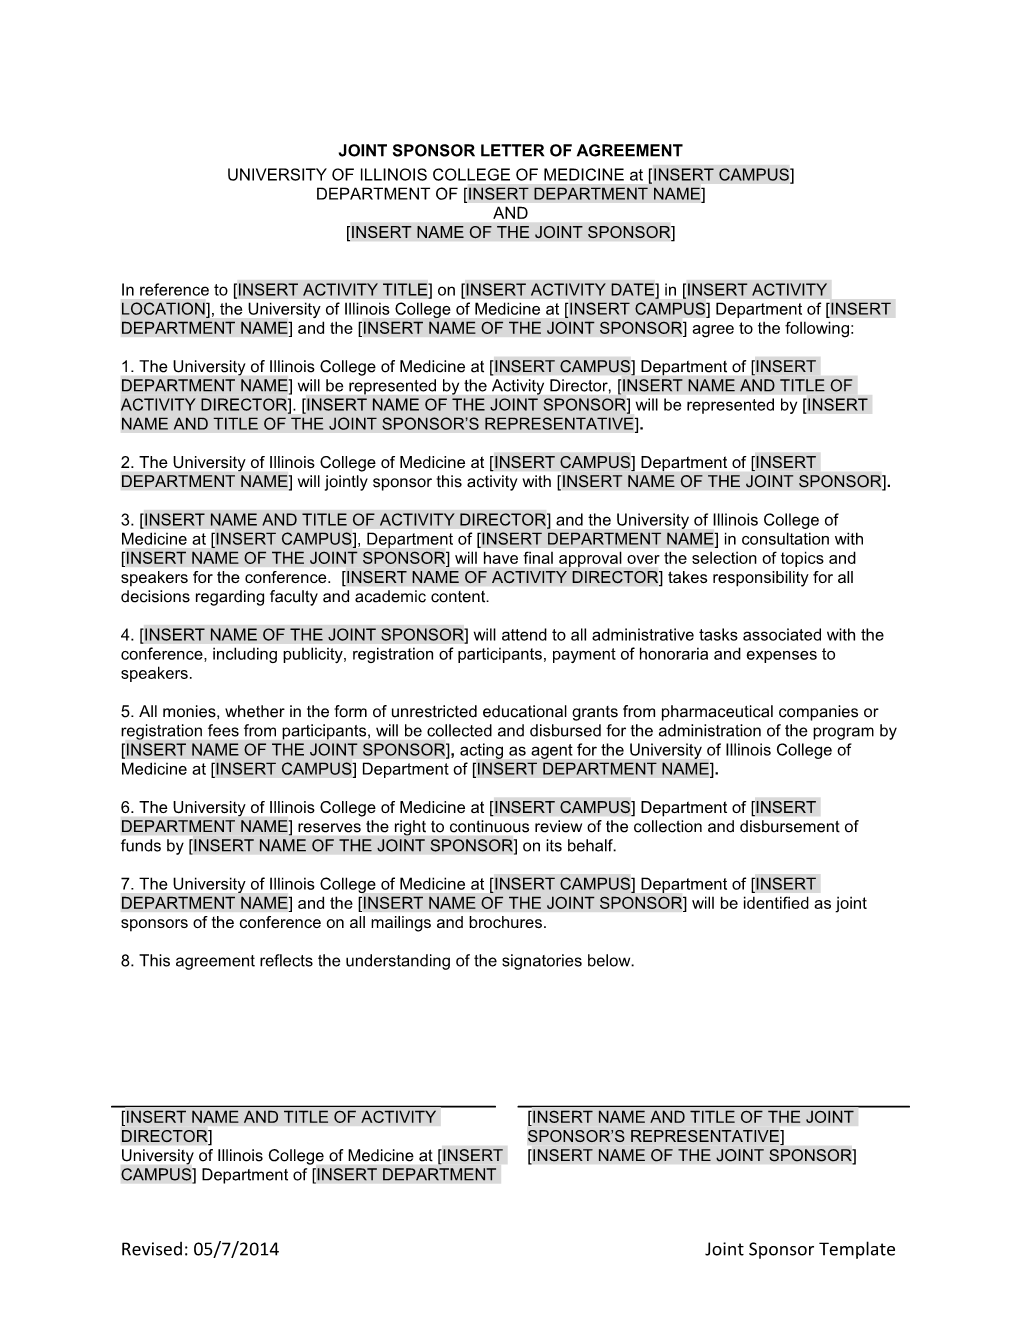 Sample Letter of Agreement for Jointly Sponsored CME Activities